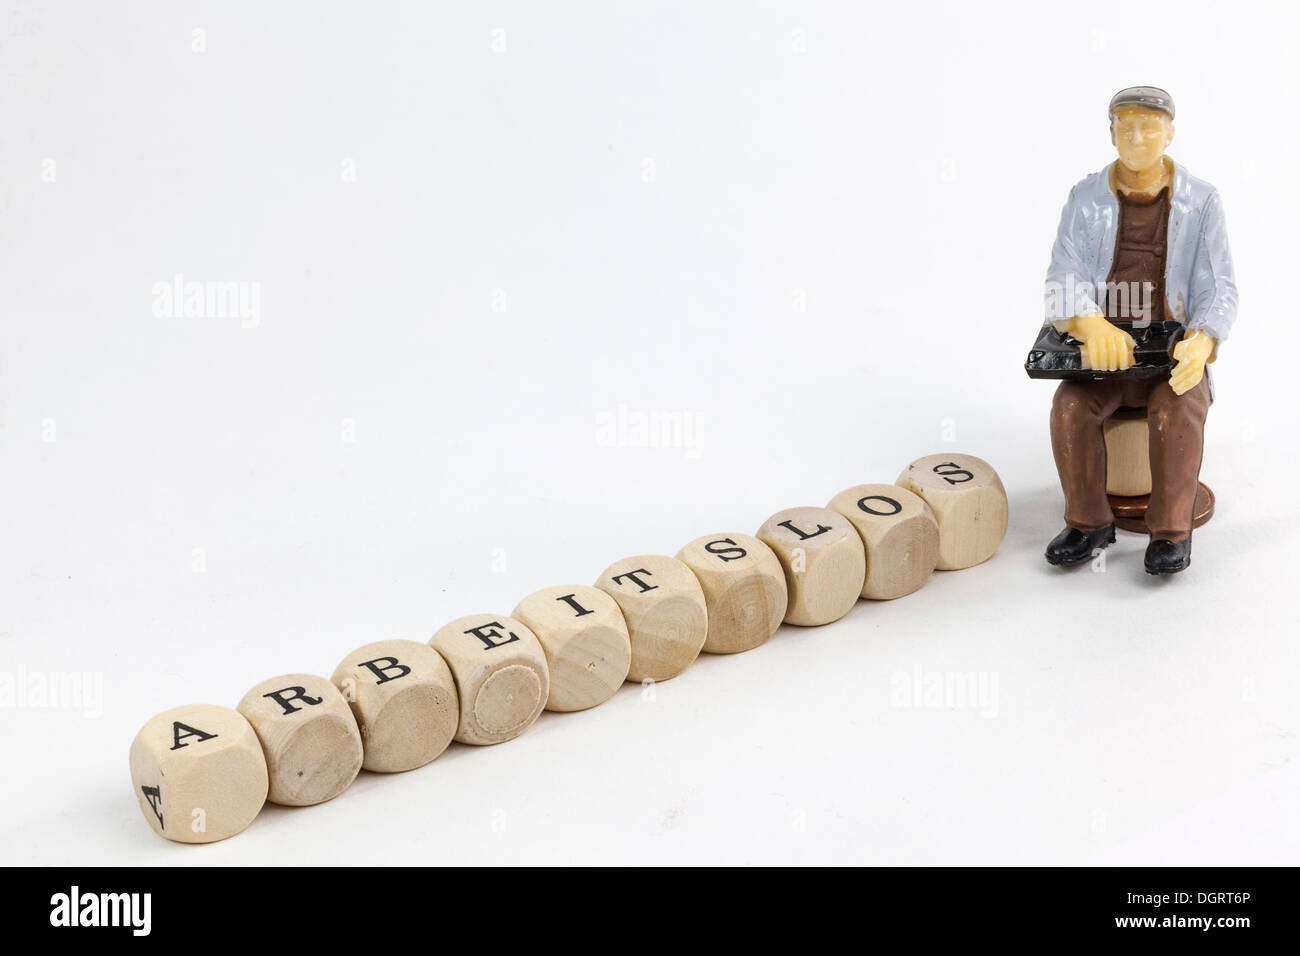 Miniature figure of an unemployed worker, letter cubes forming the word 'arbeitslos', German for 'unemployed' Stock Photo